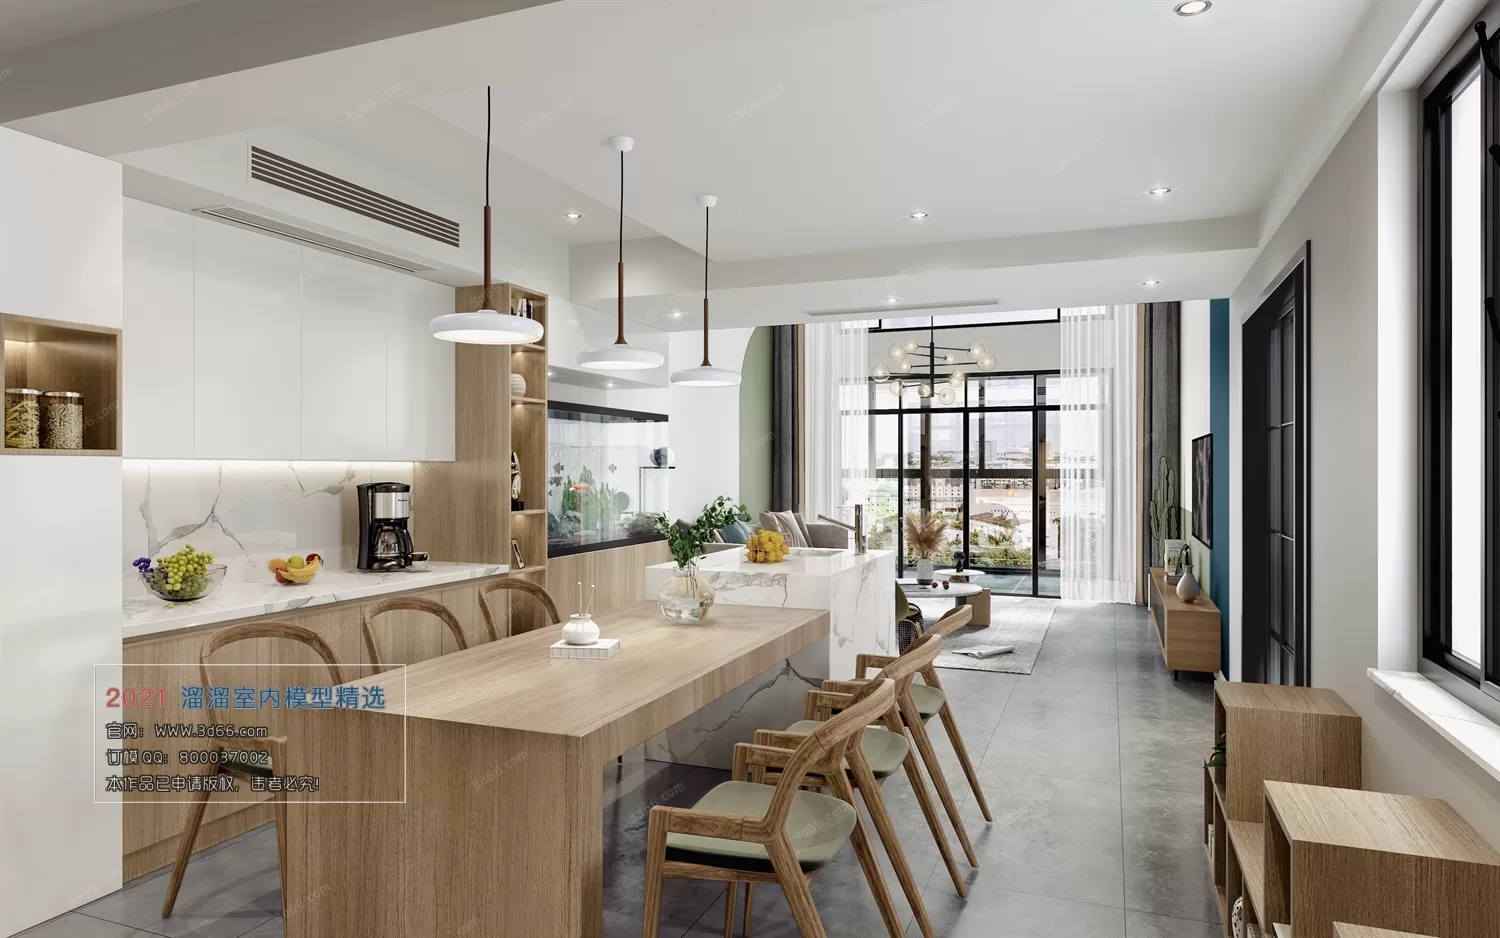 DINING, KITCHEN – M001-Nordic style-Vray model